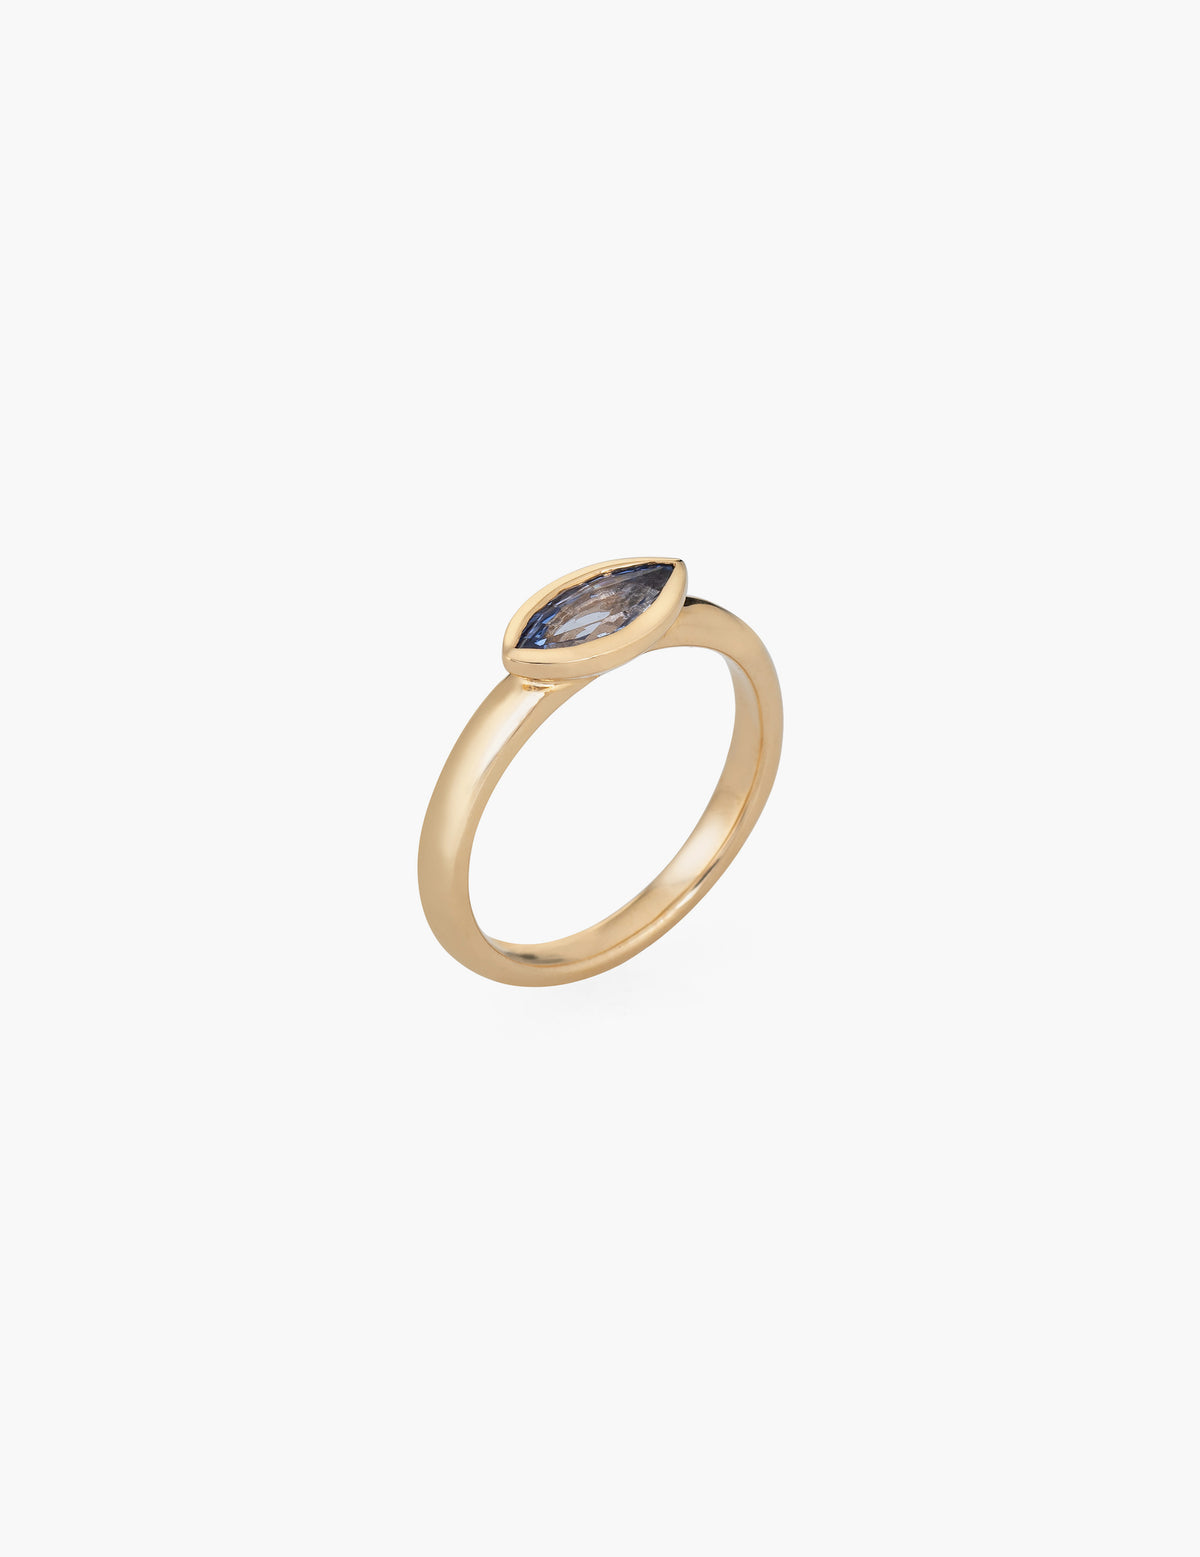 Marquise Blue Sapphire Ring